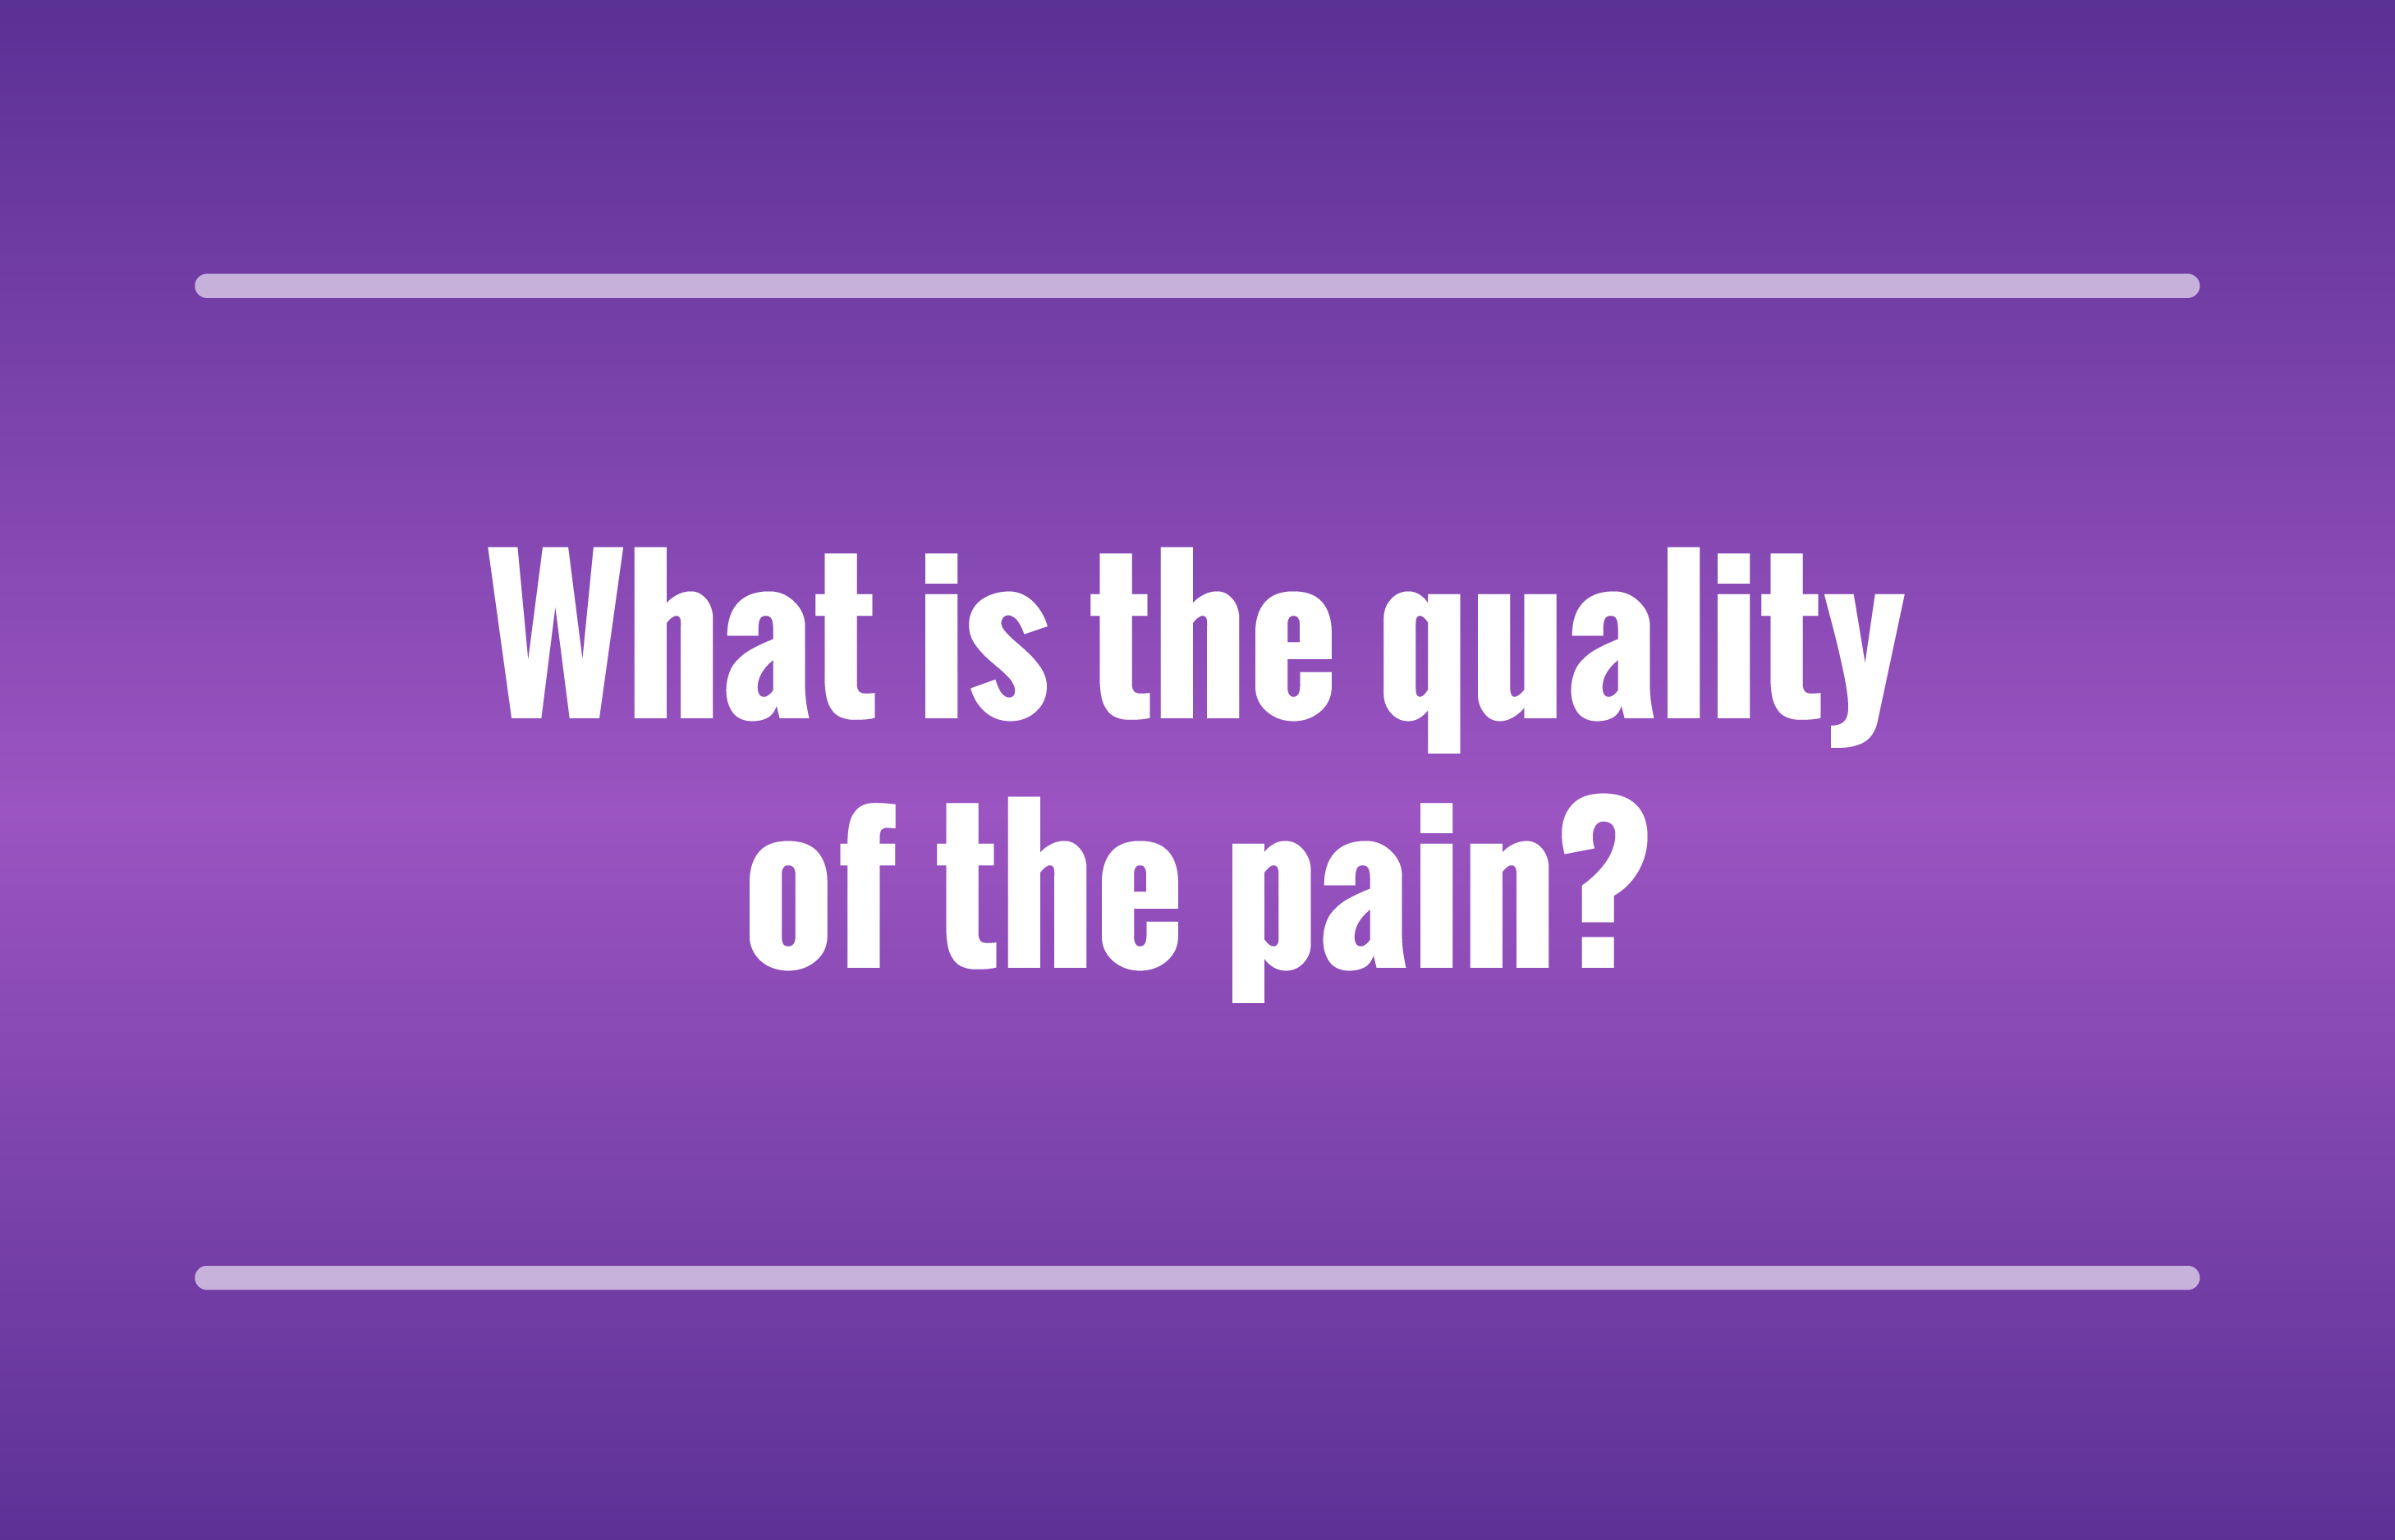 What is the quality of the pain?